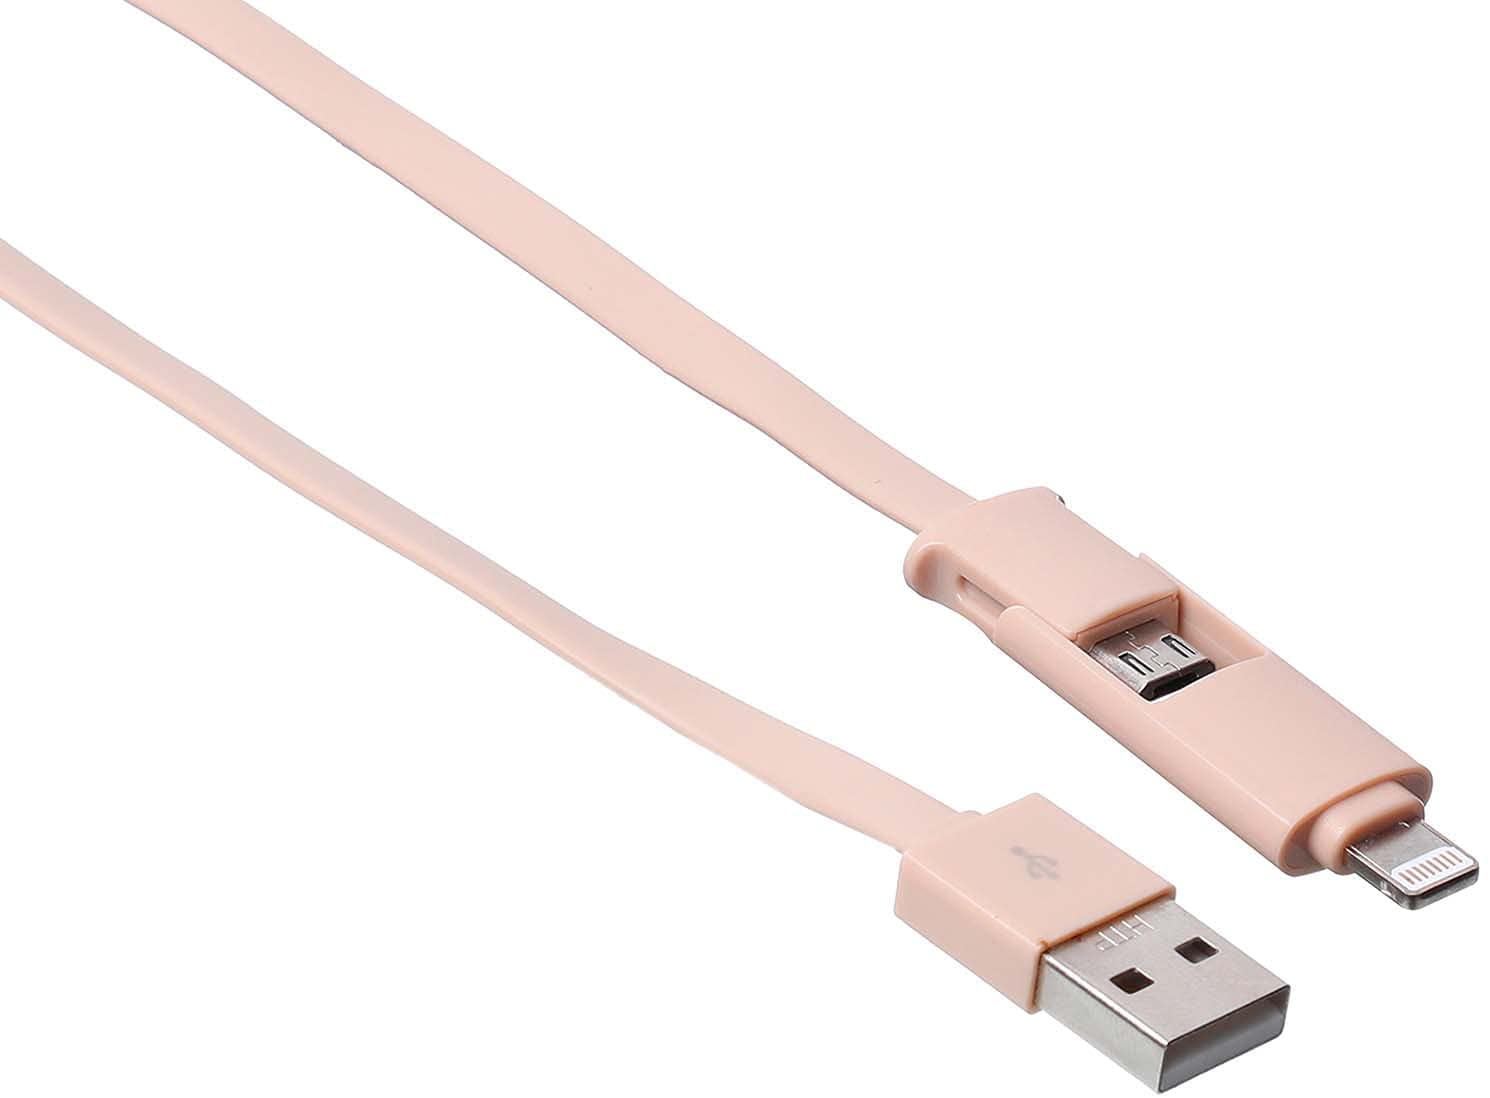 Keendex 2 In 1 Lightning And Micro USB Charging Cable , 1 M , Rose - 1895